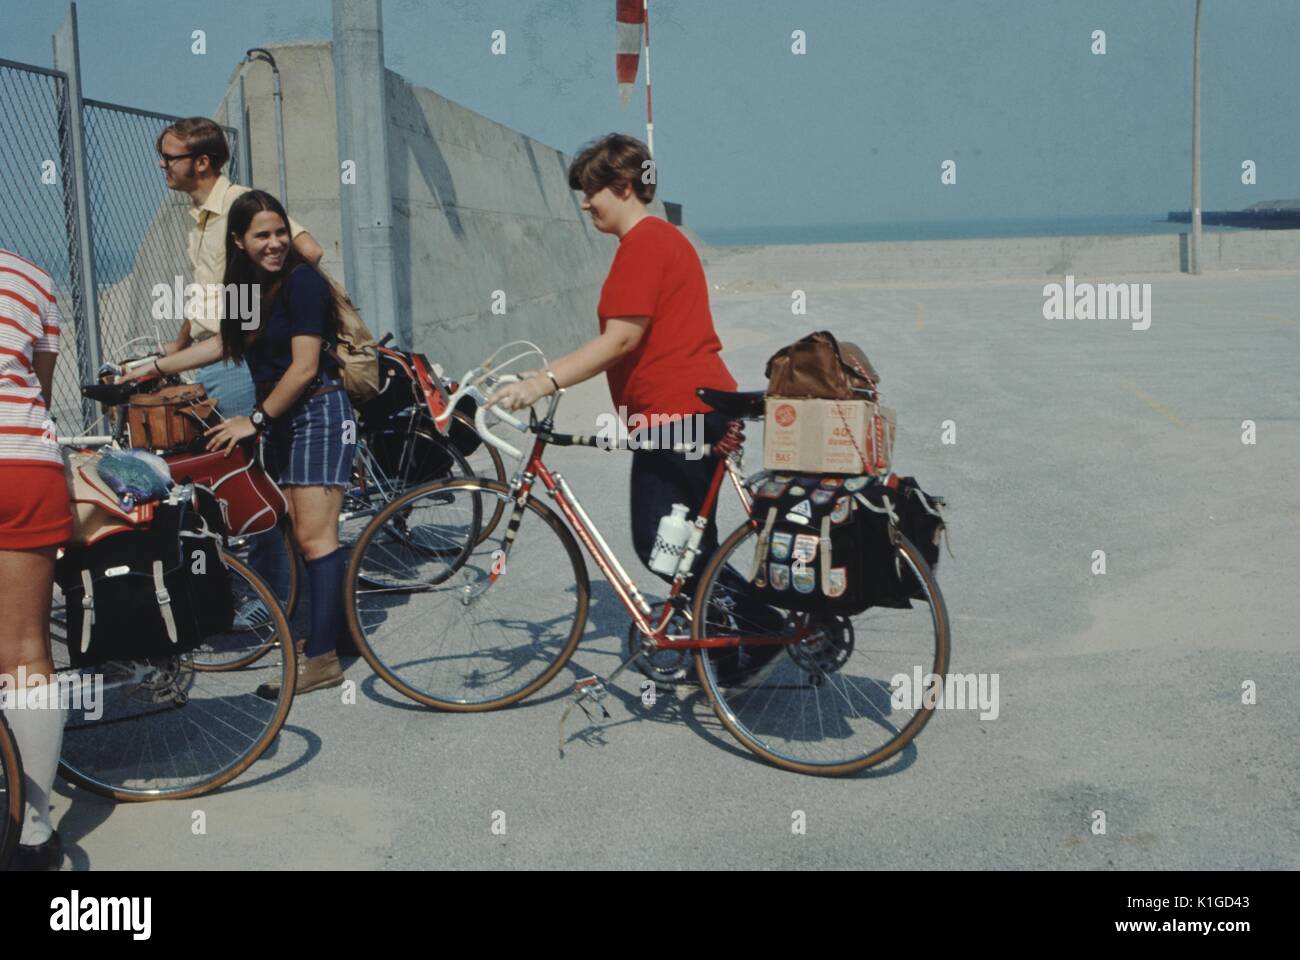 Two girls with their bike talking as they stop by a fenced area, with two other people standing by, 1966. Stock Photo